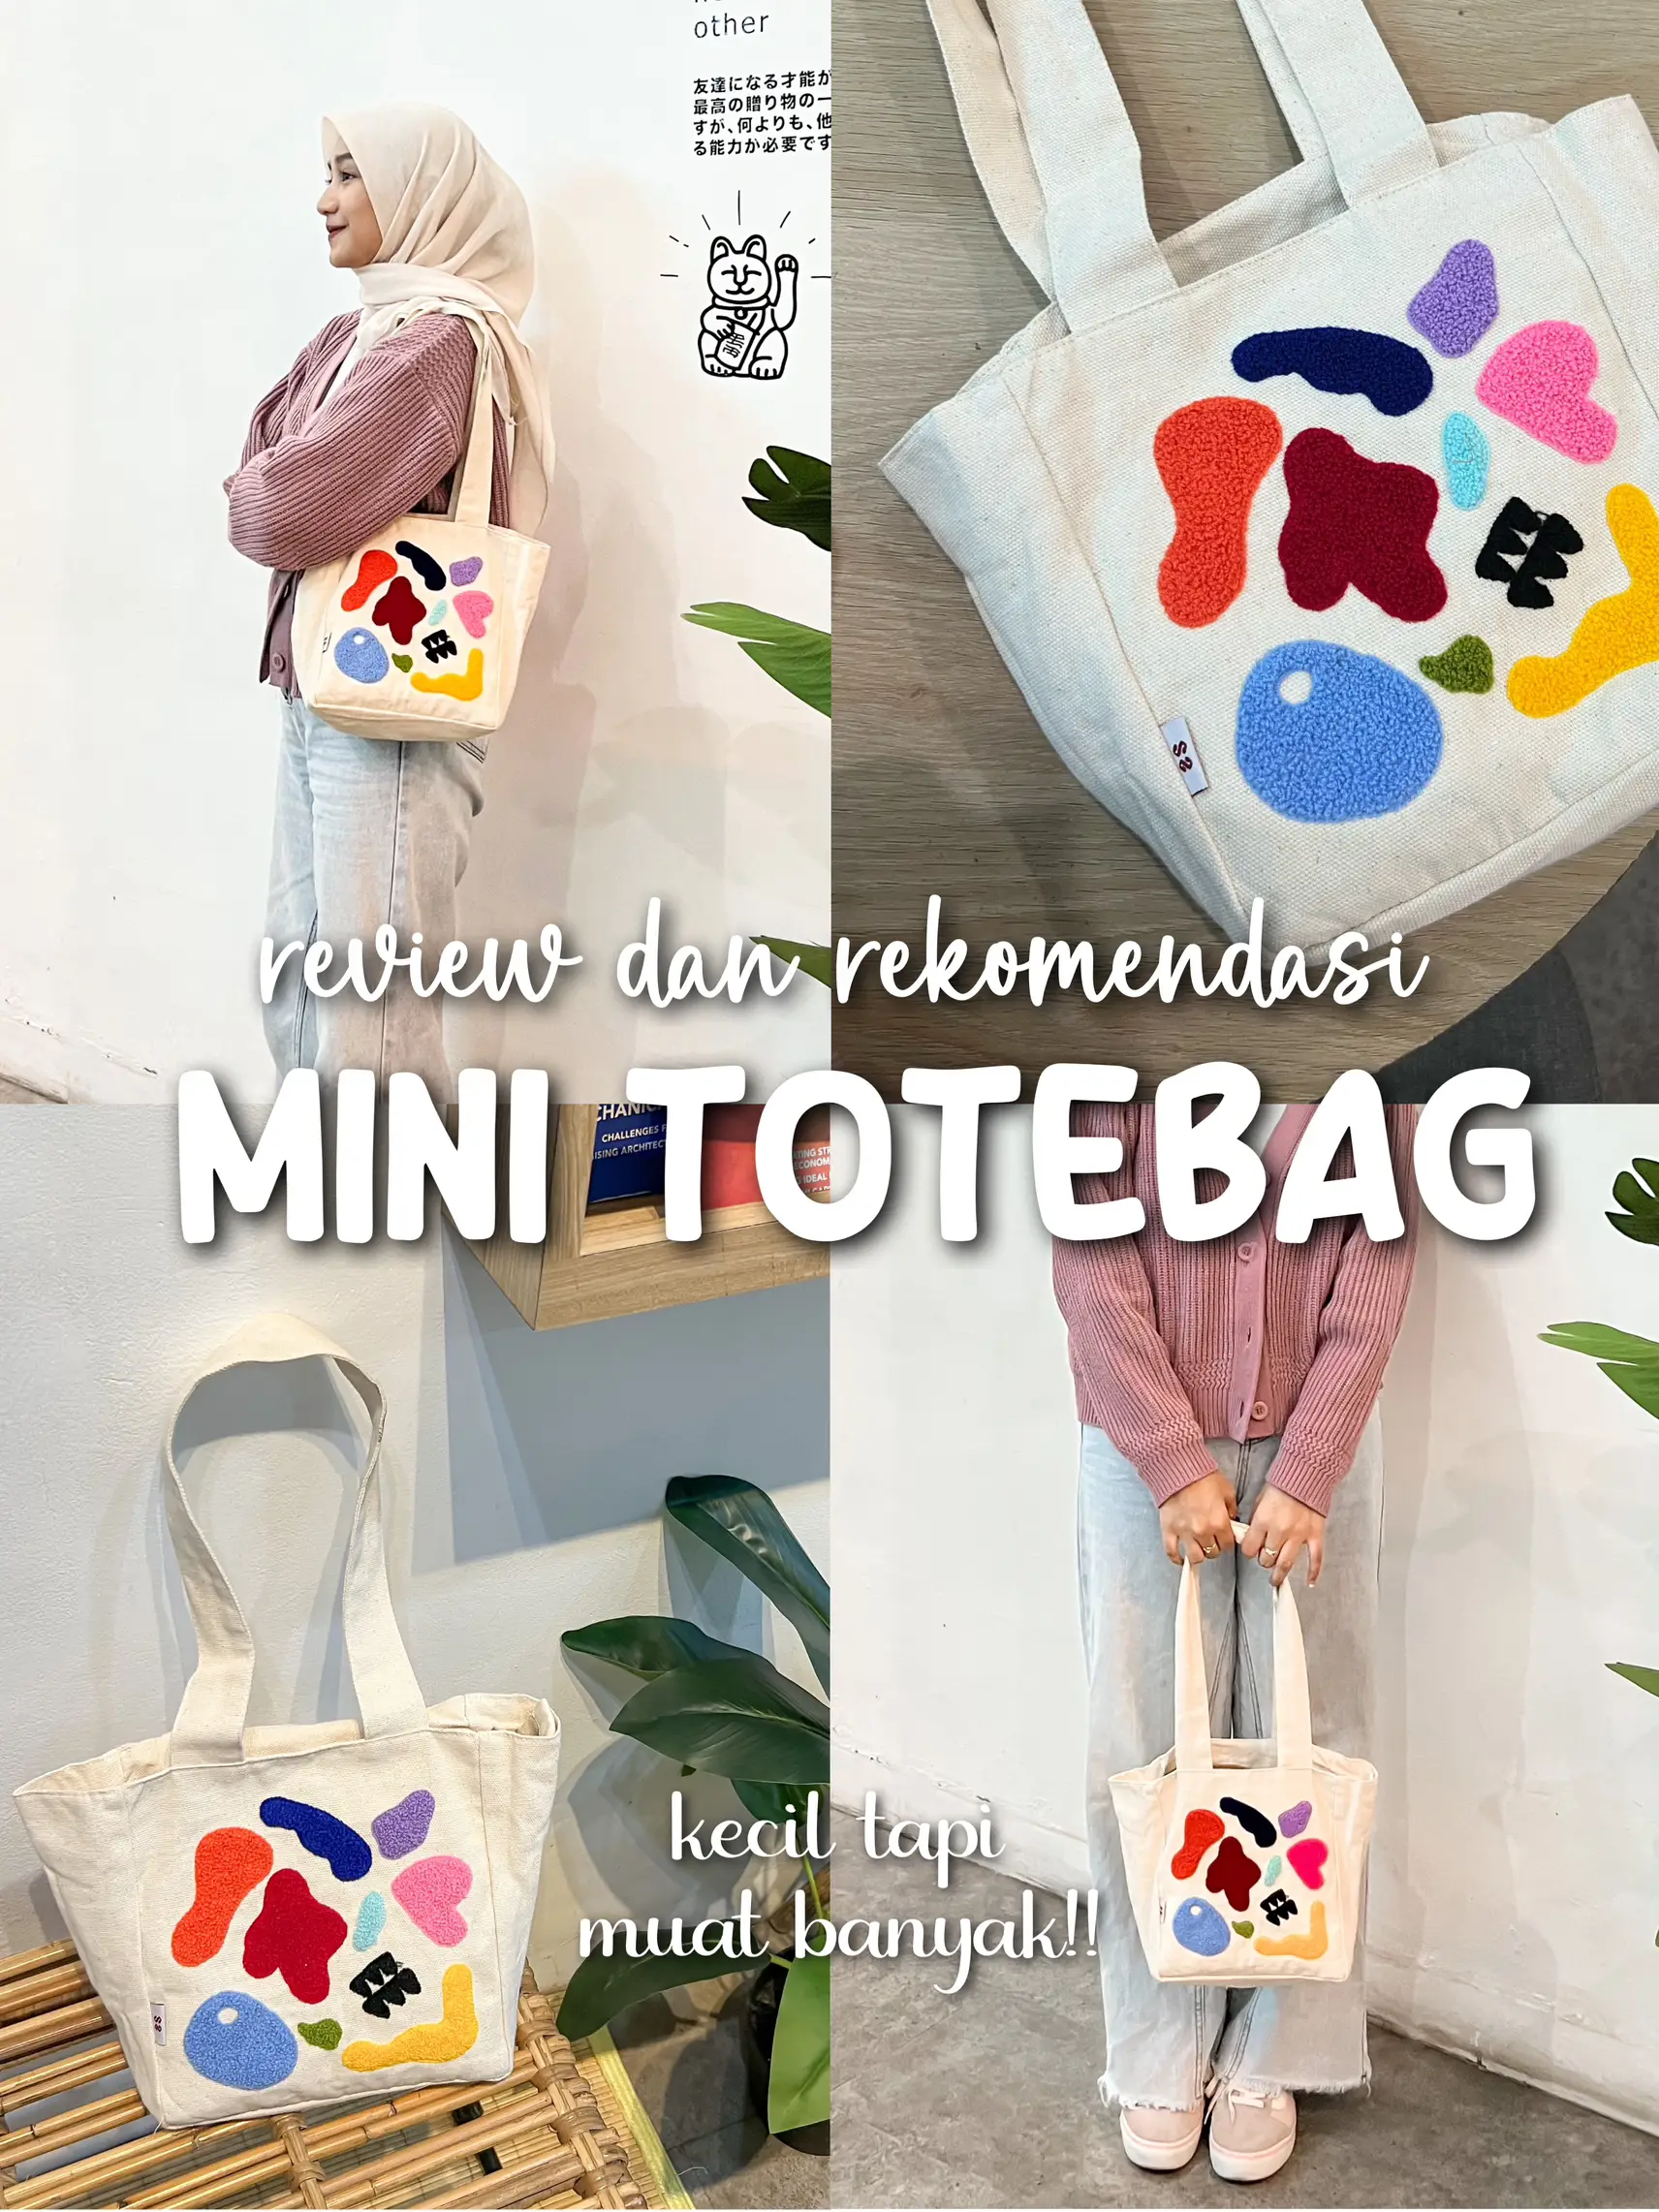 How I Style: MINI TOTE BAG FOR CAMPUS LOOK